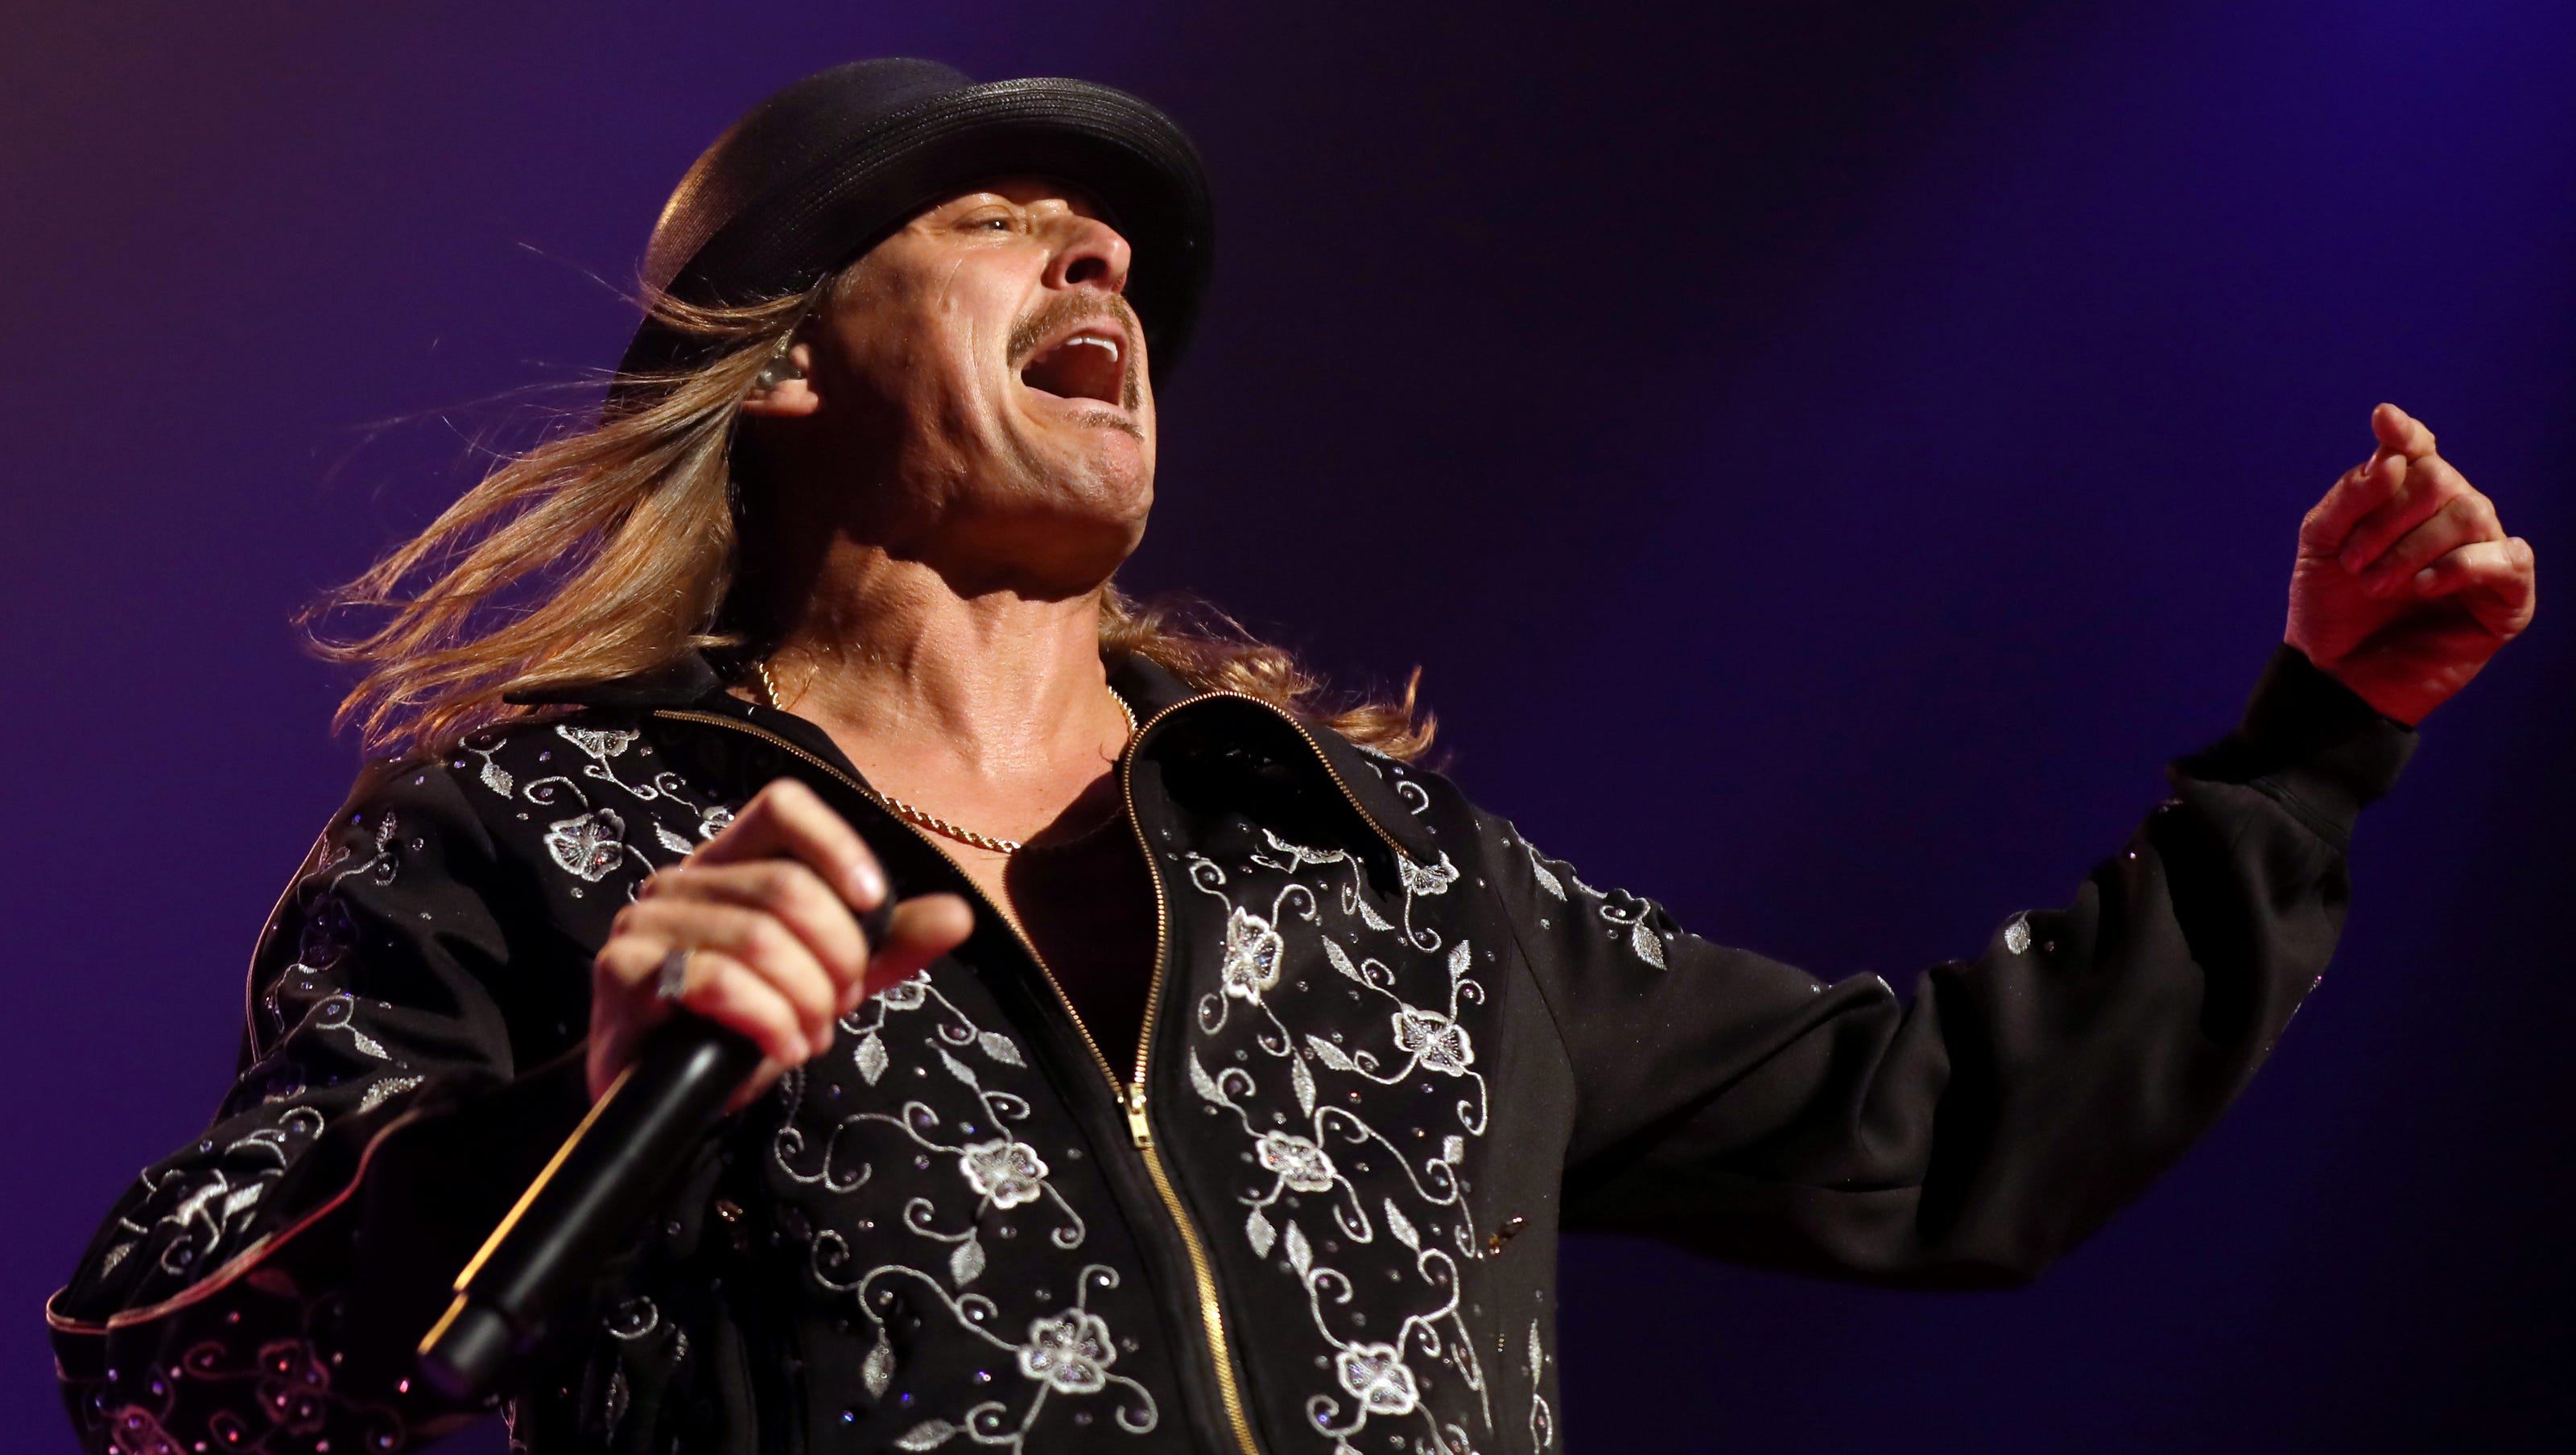 Kid Rock 'a great actor' in 'Waffle House Christmas' music video